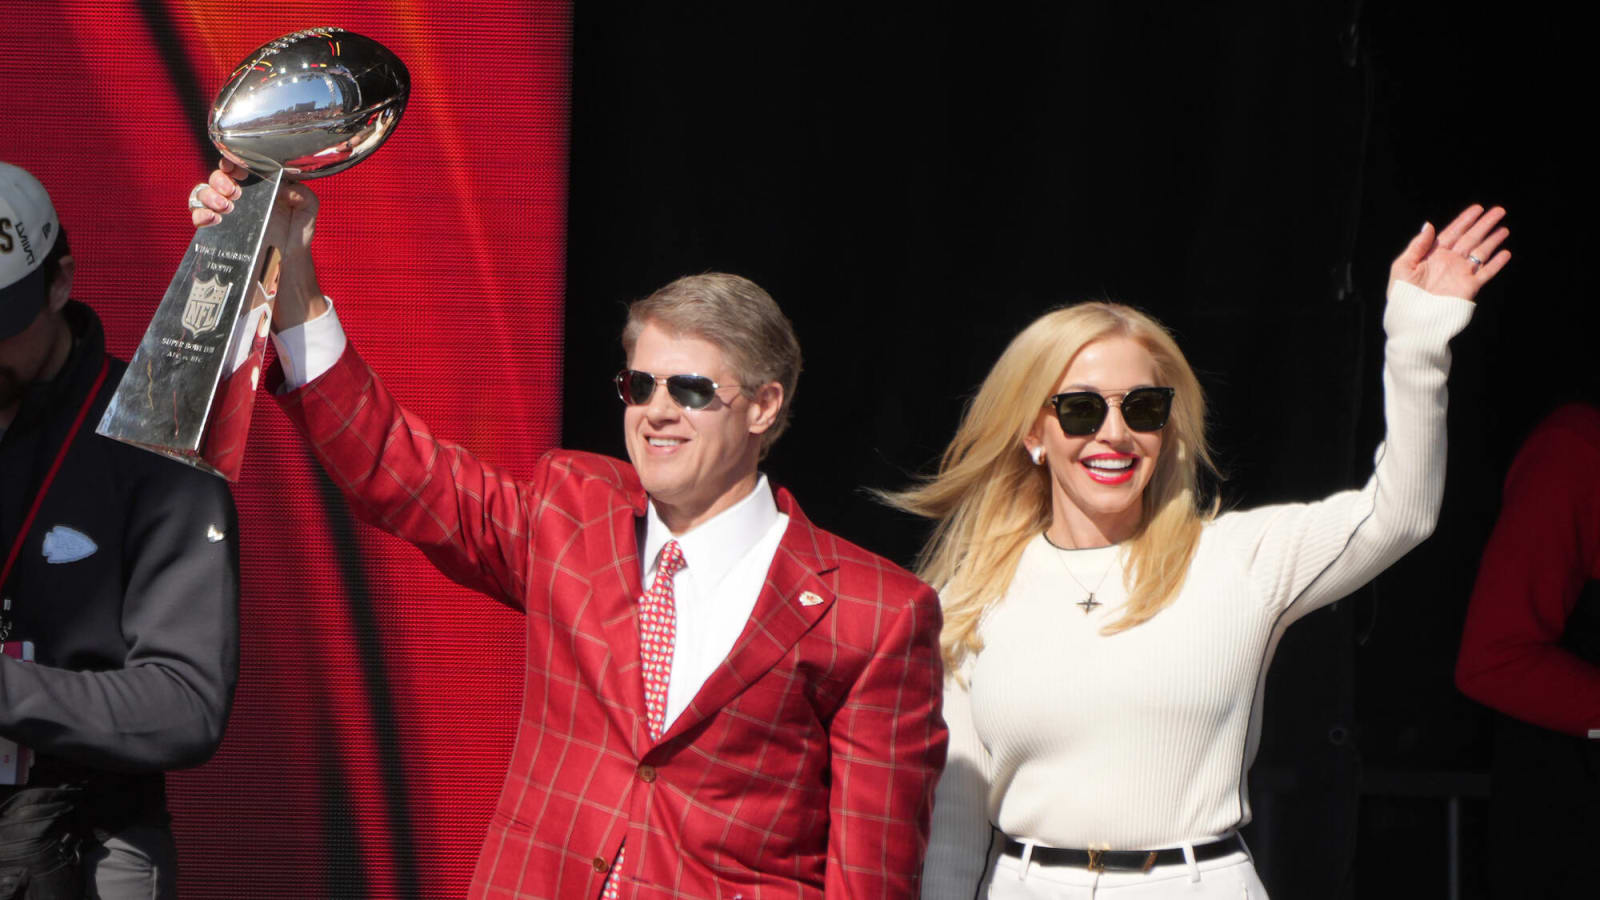 Chiefs boss Clark Hunt breaks silence on Arrowhead Stadium potentially hosting Super Bowl after $800 Million renovations failed to list a roof